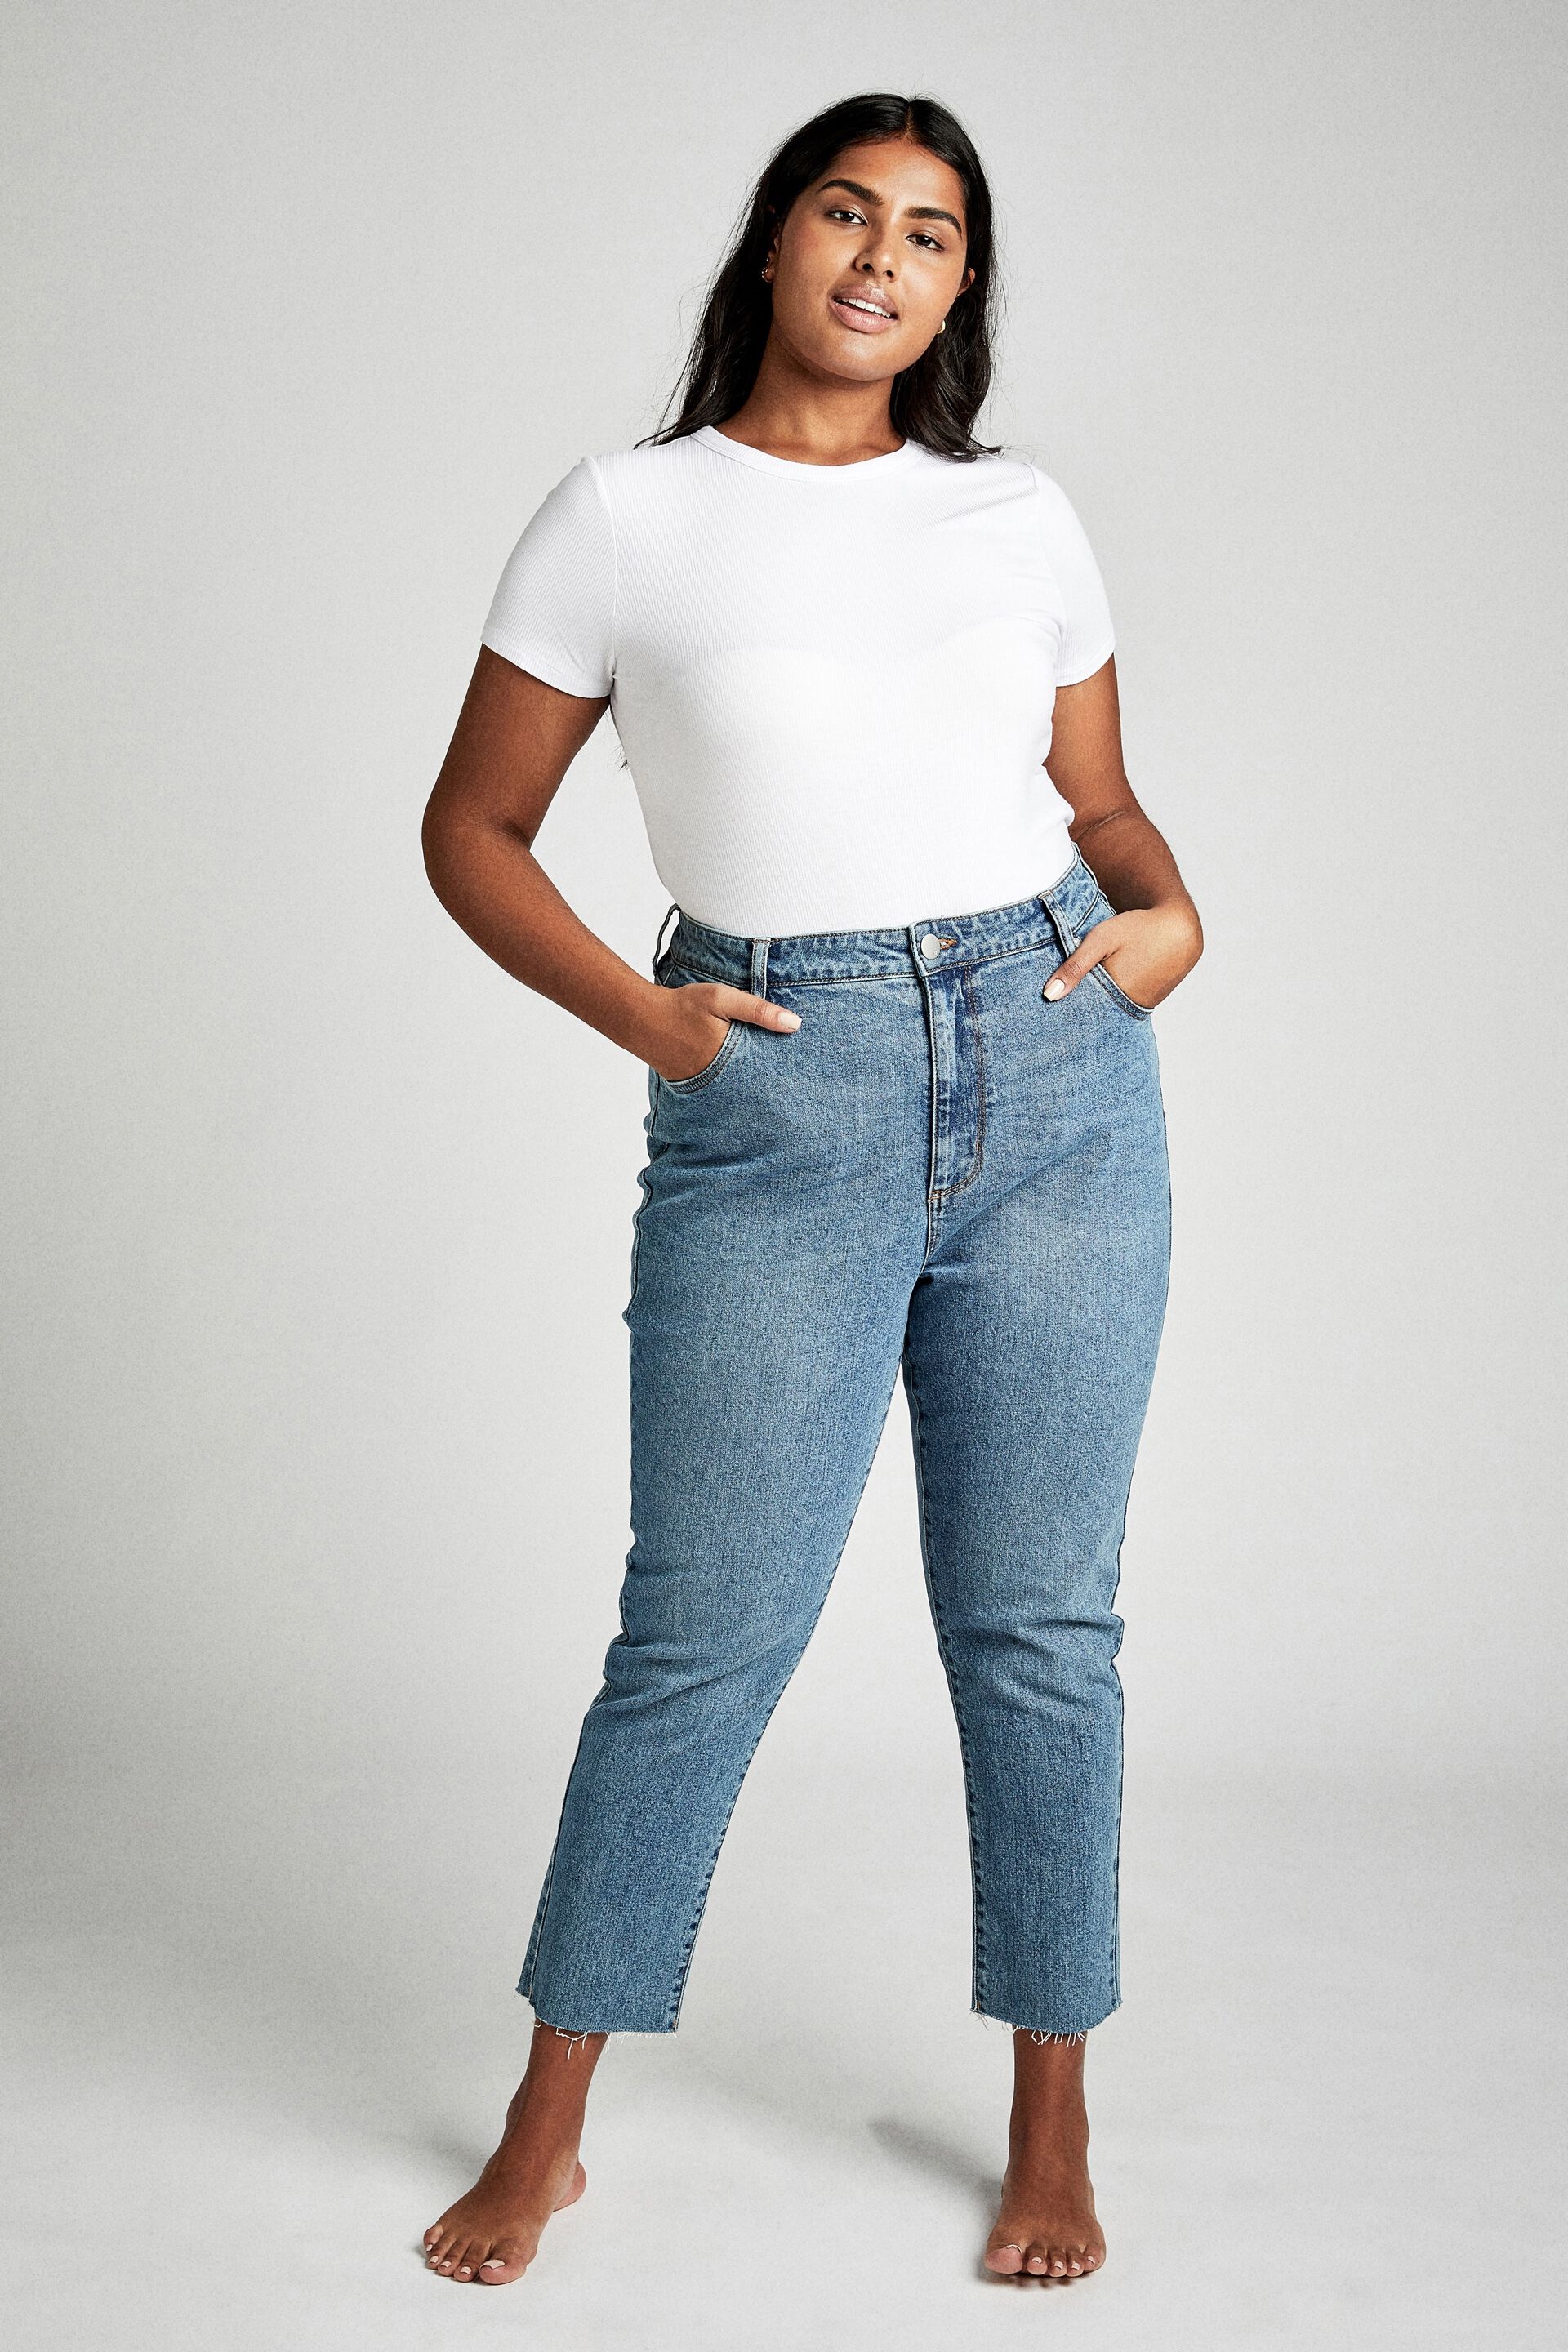 size 2 mom jeans